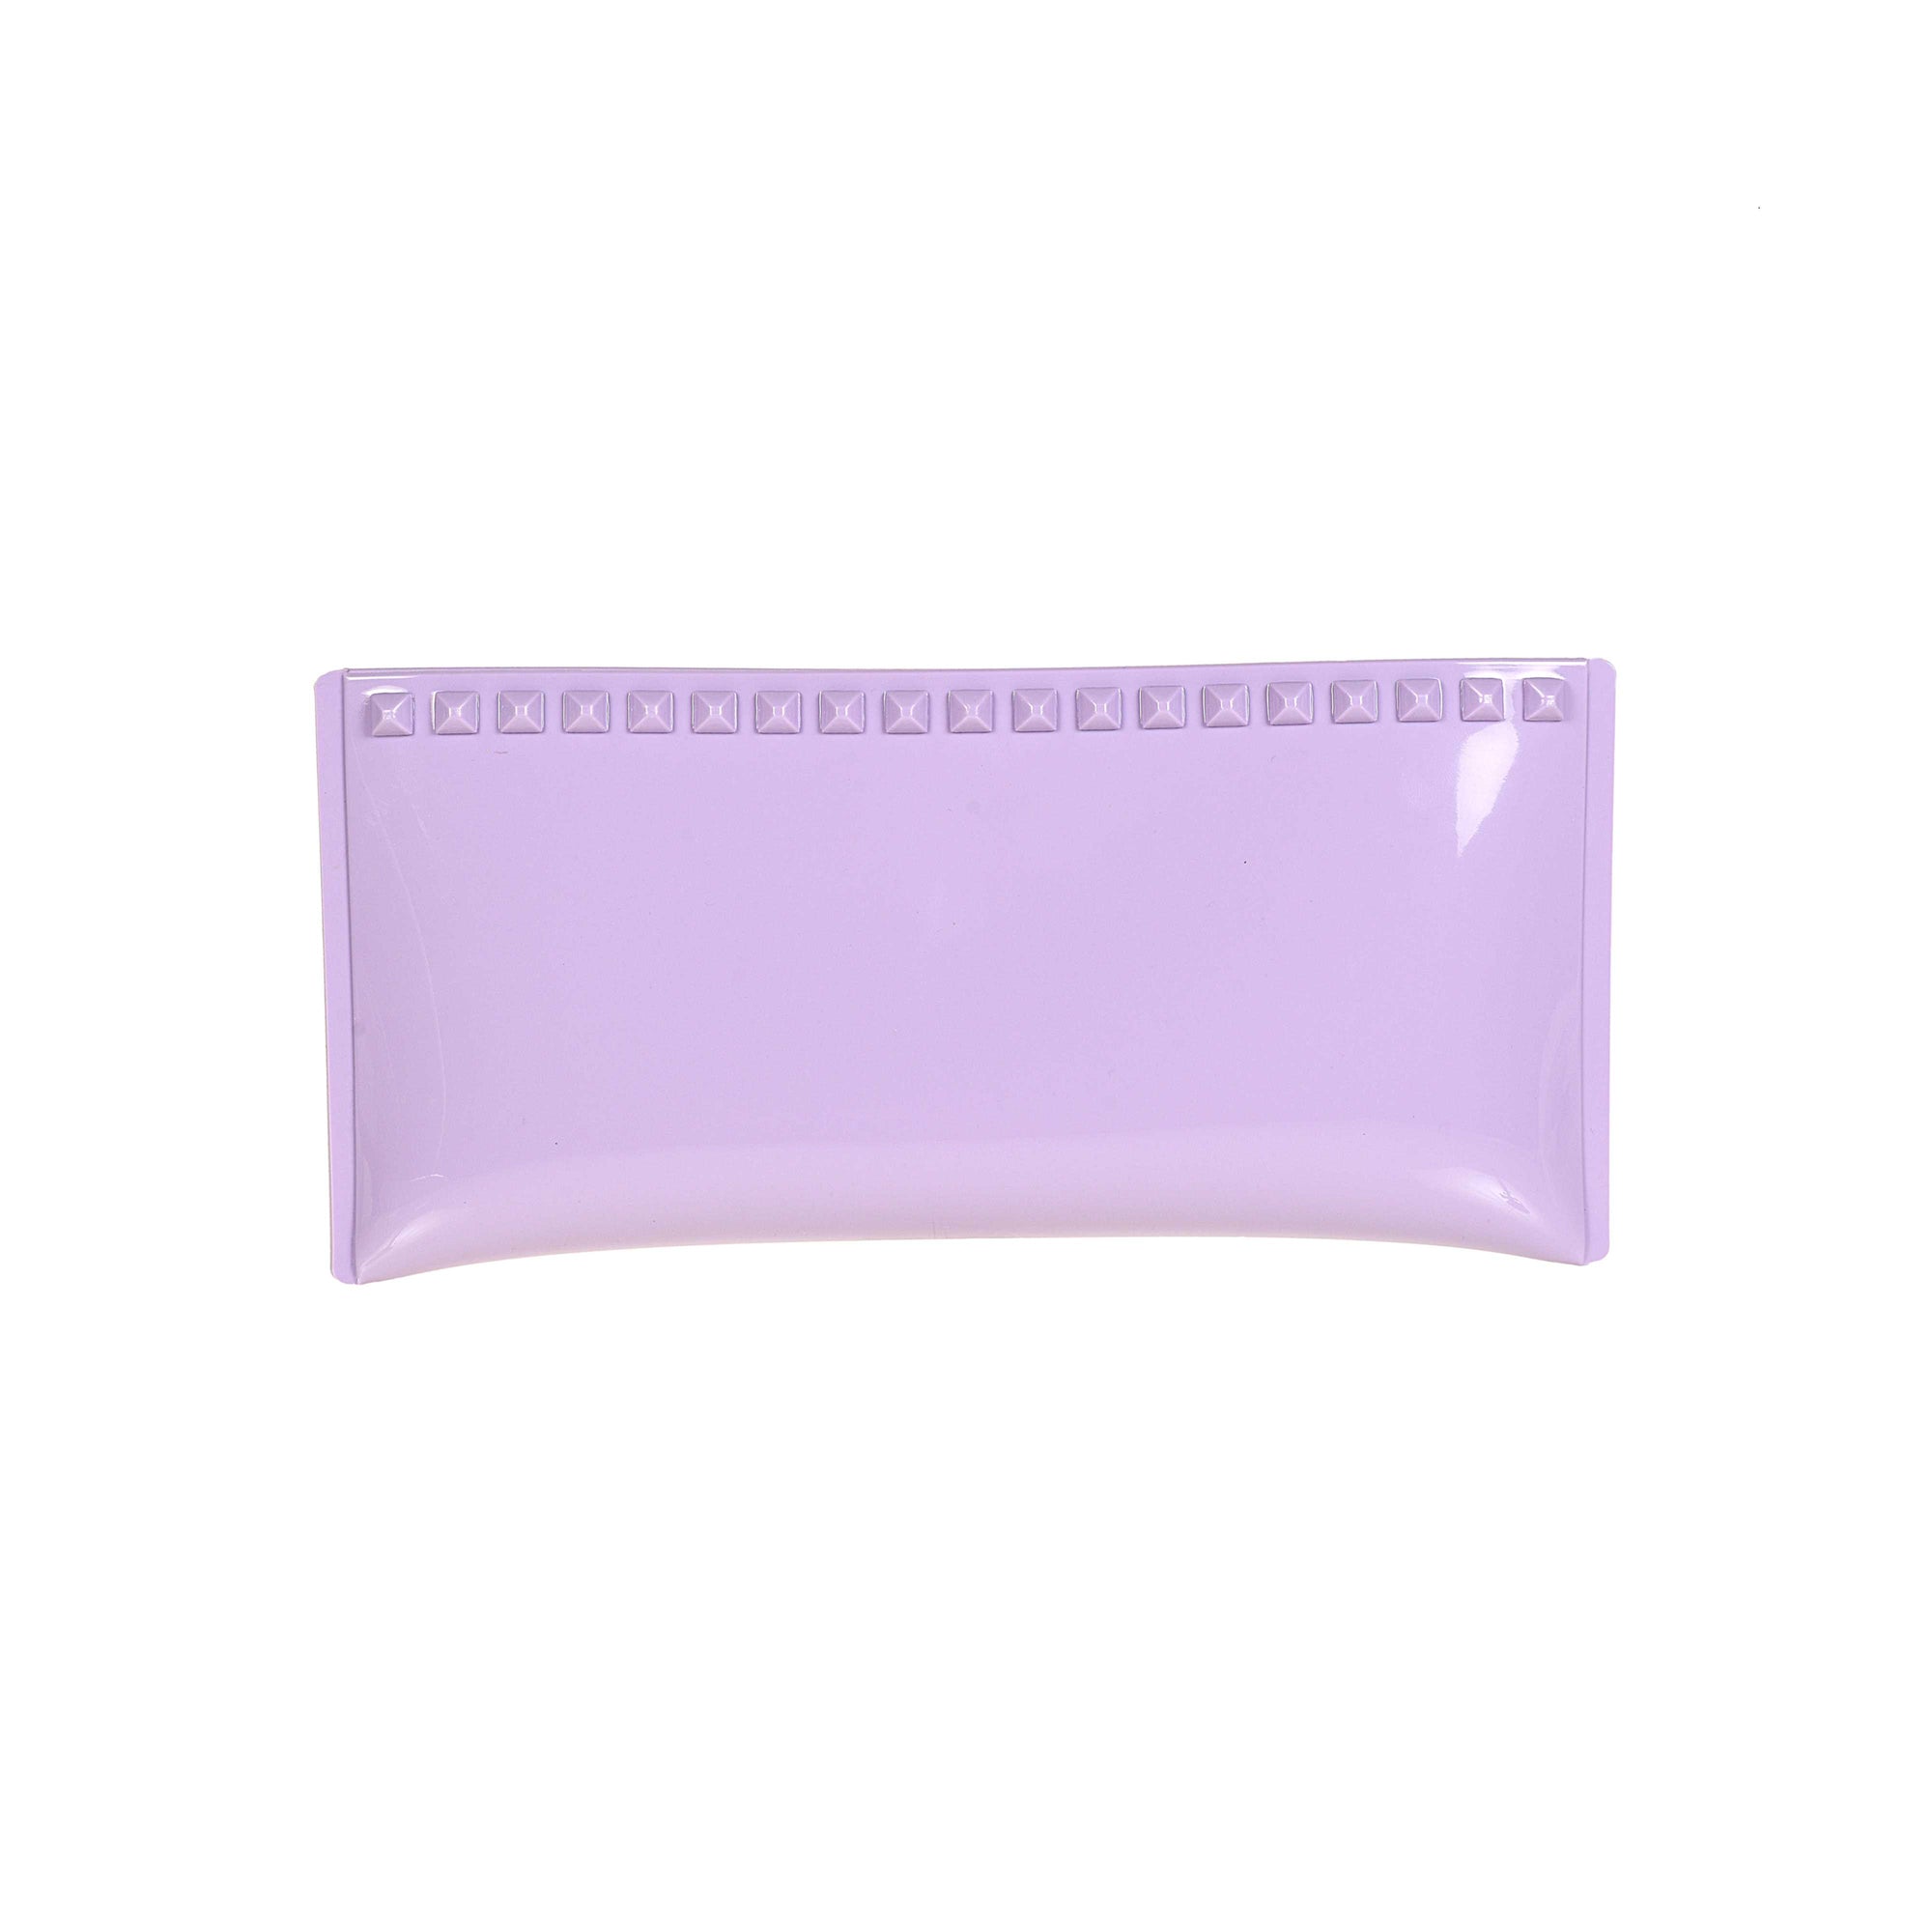 Studded jelly purse from Carmen Sol in color violet